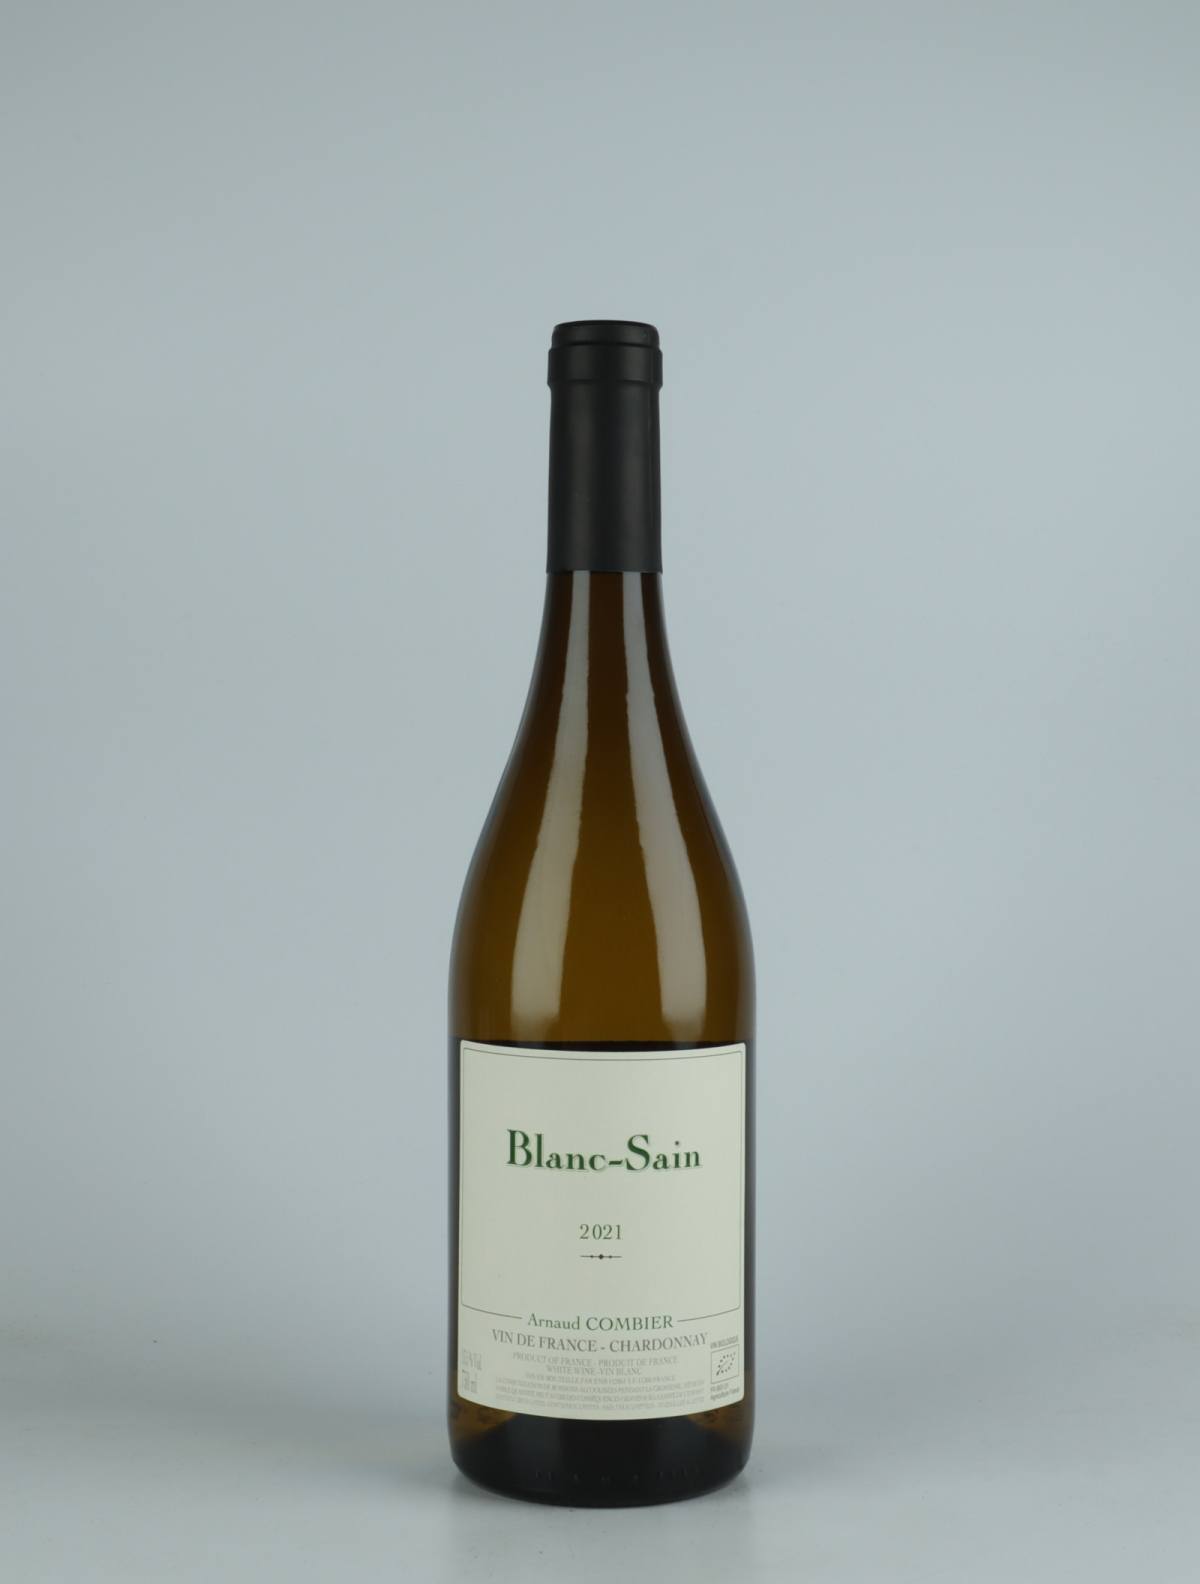 A bottle 2021 Blanc-Sain White wine from Arnaud Combier, Beaujolais in France